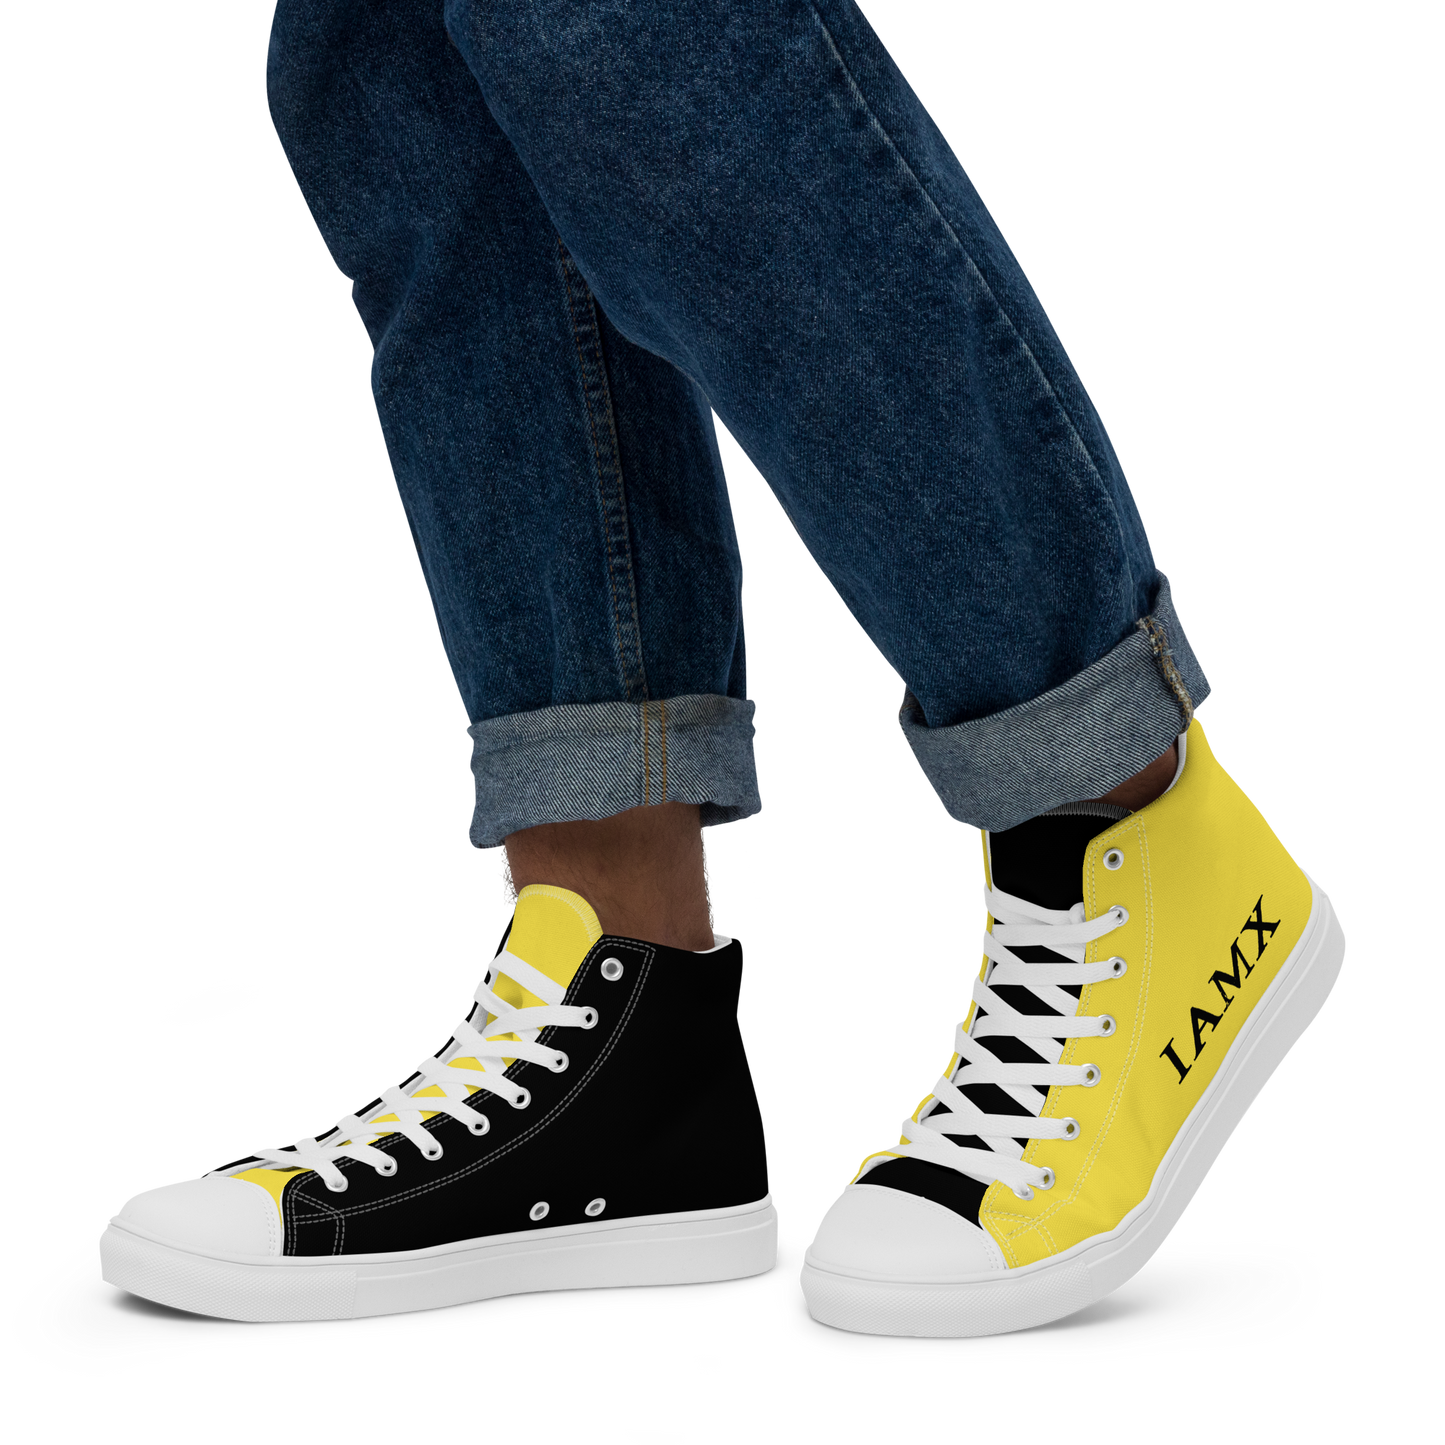 Men’s High Top Shoes - The Alternative